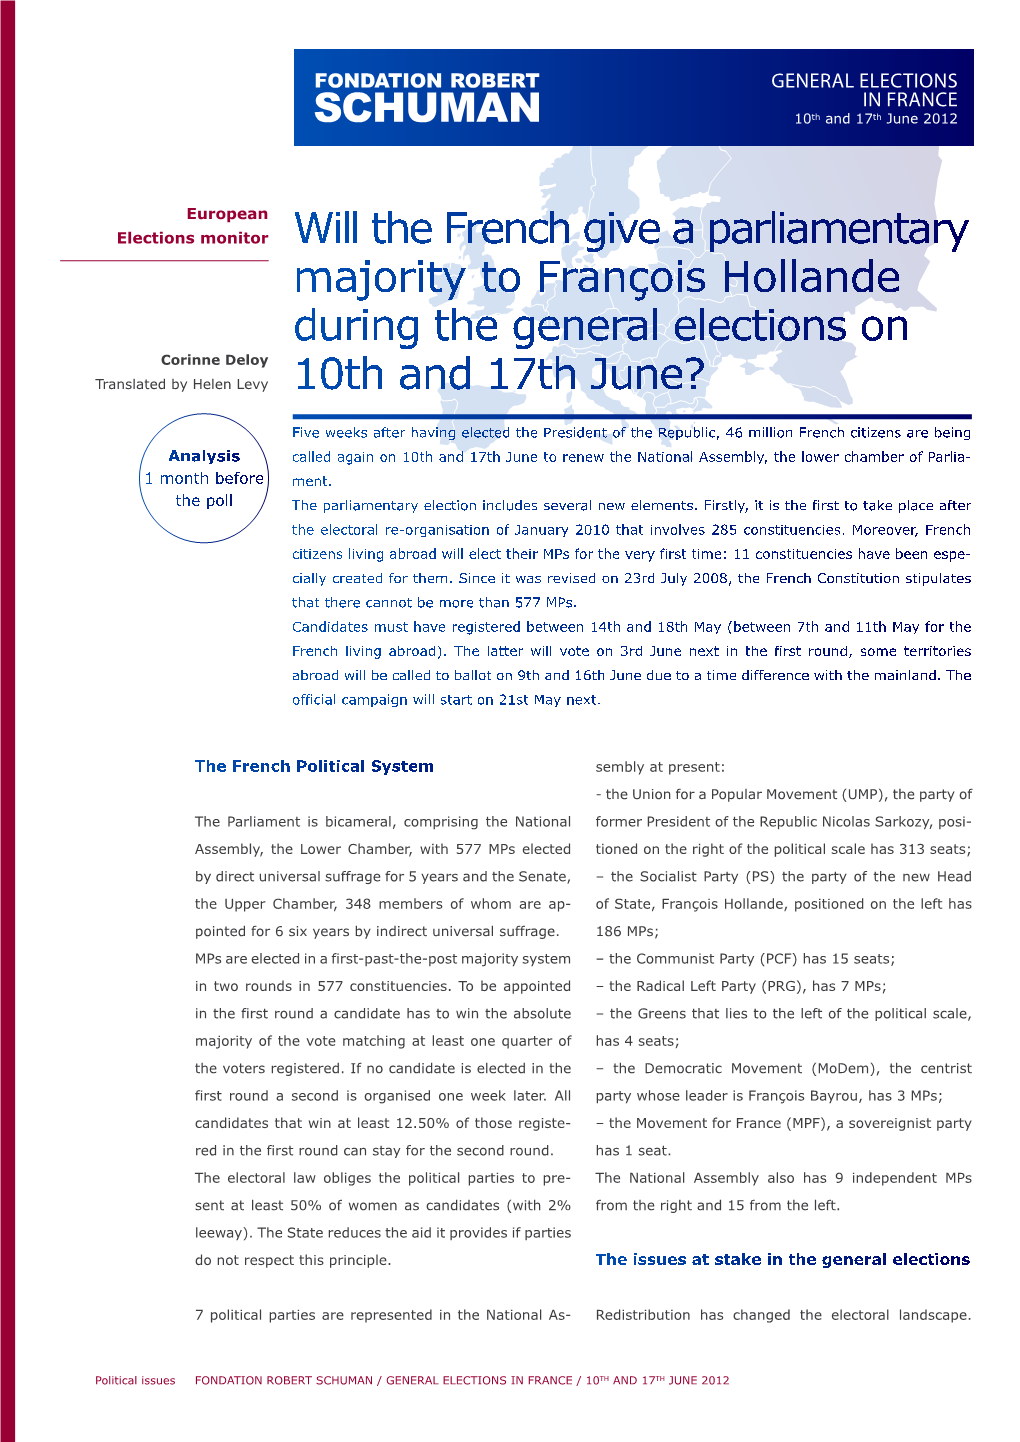 GENERAL ELECTIONS in FRANCE 10Th and 17Th June 2012